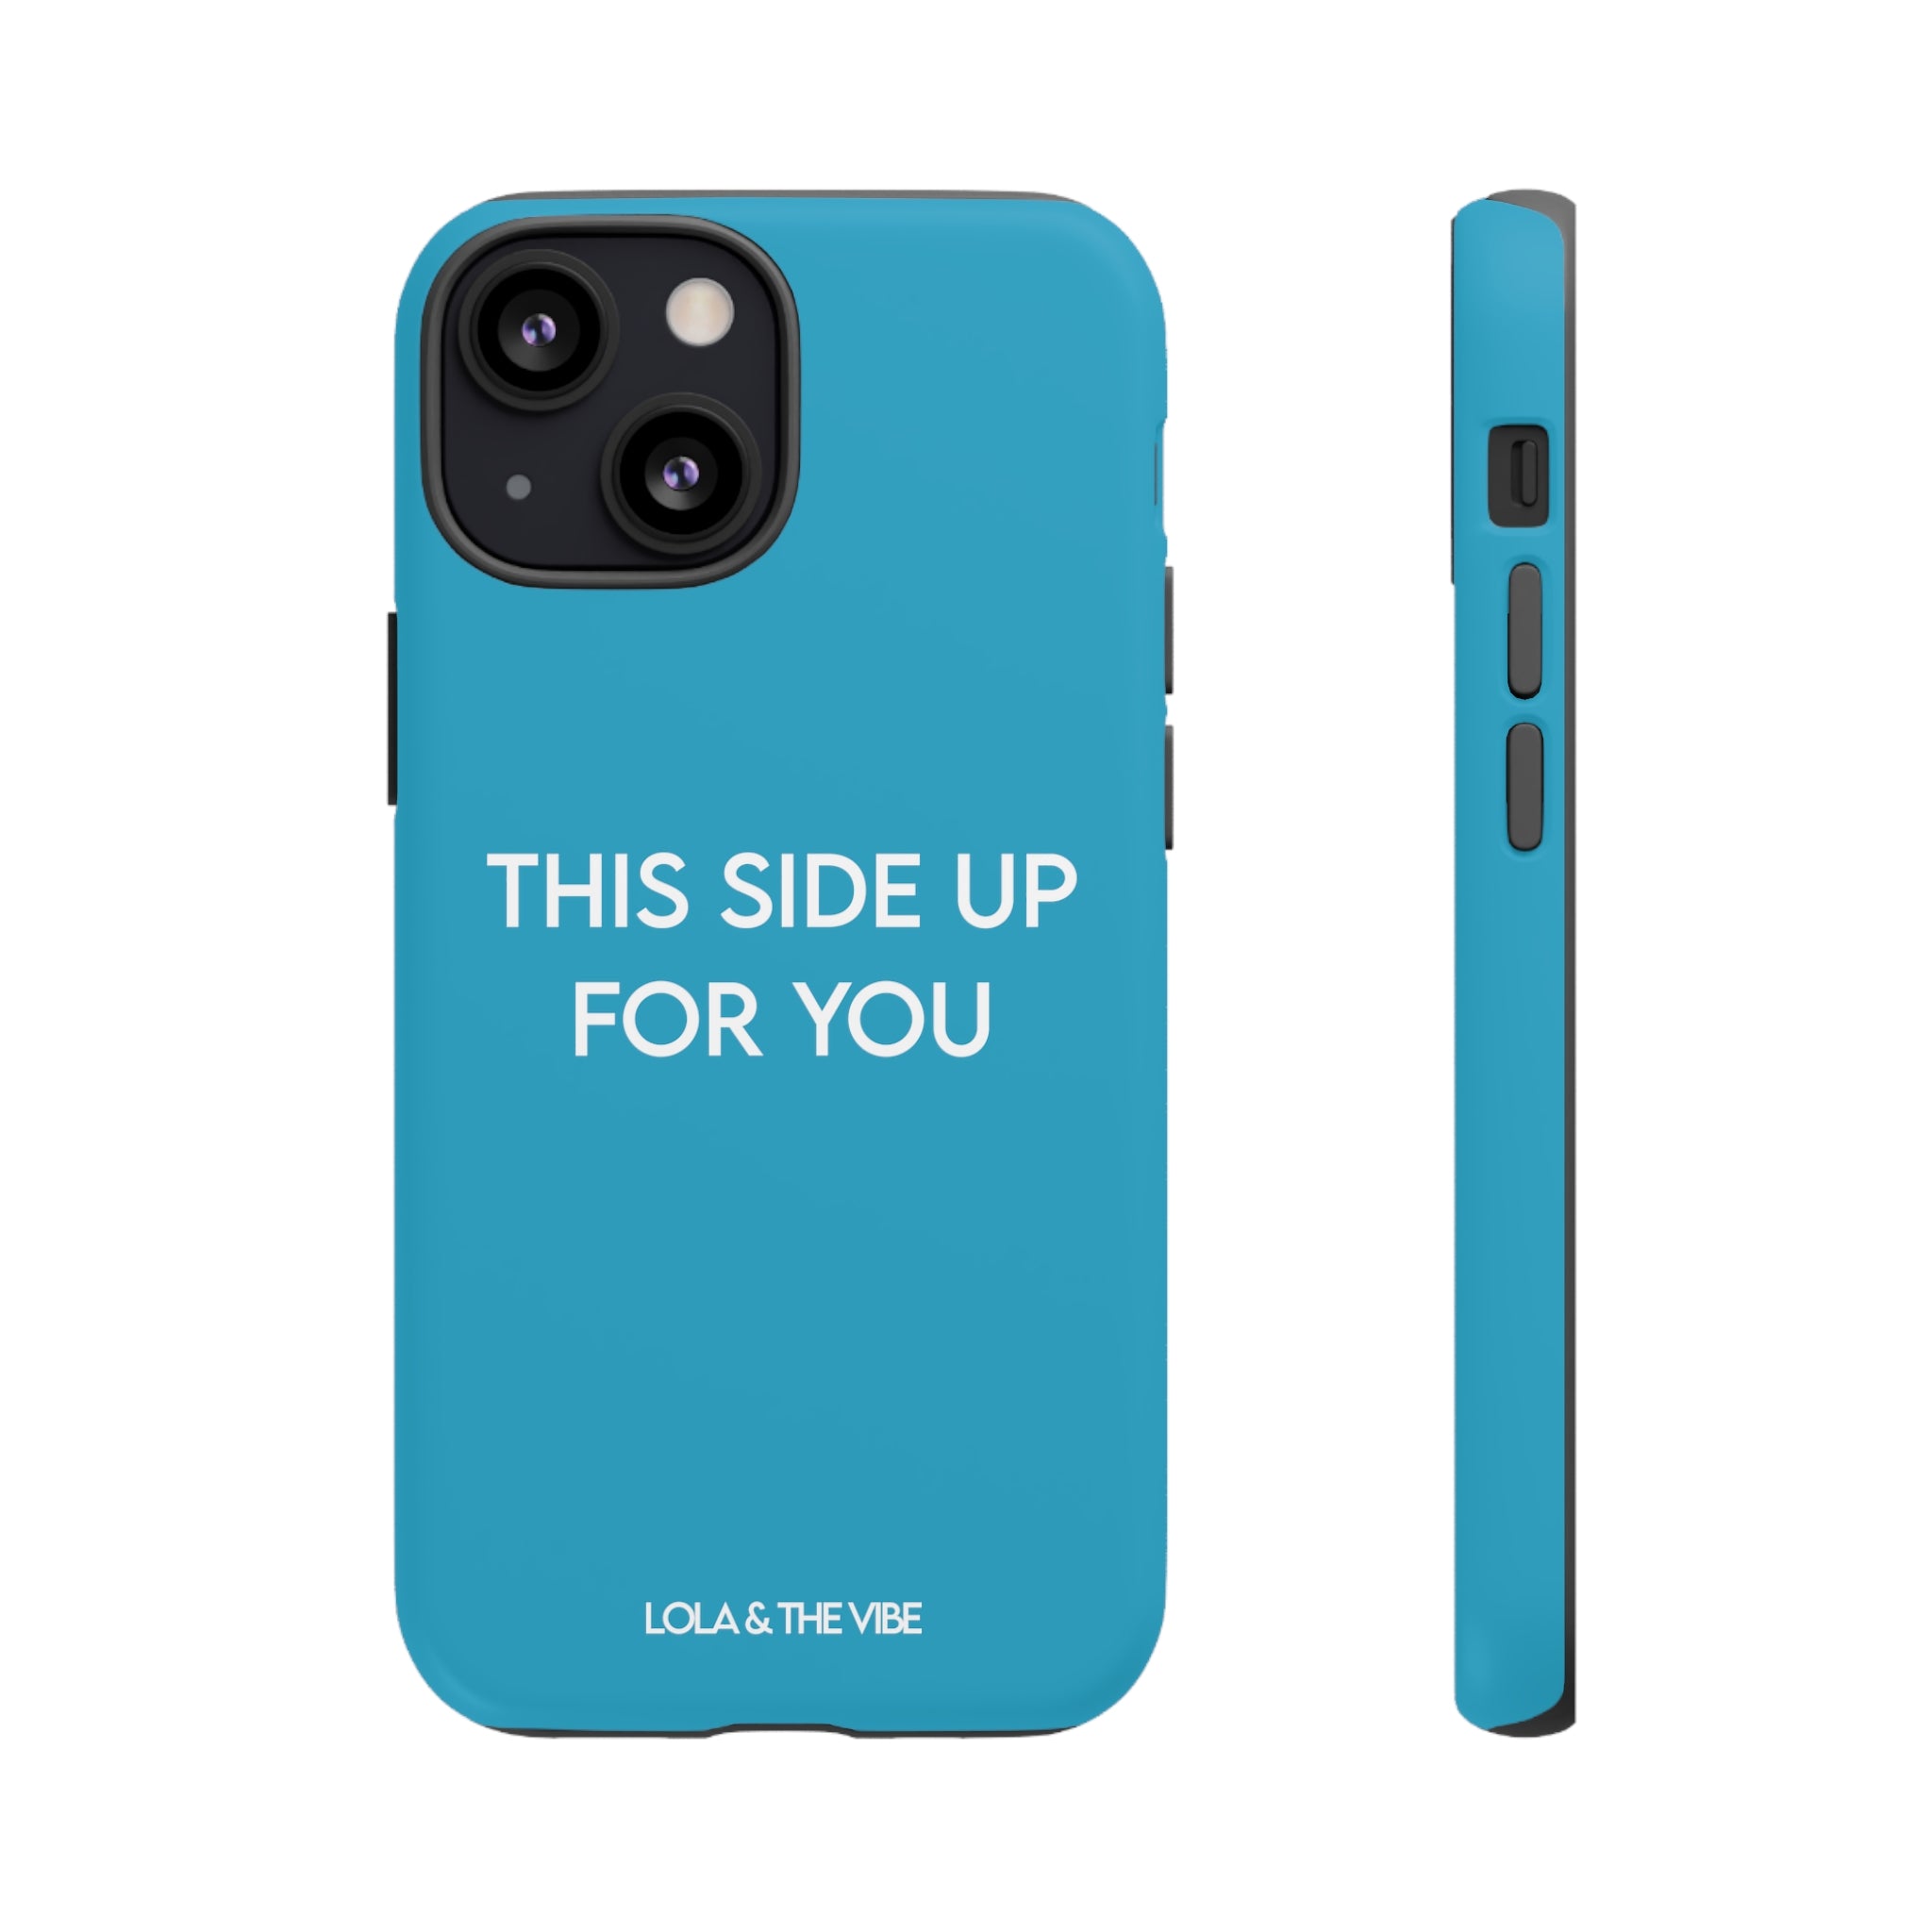 For You iPhone Case